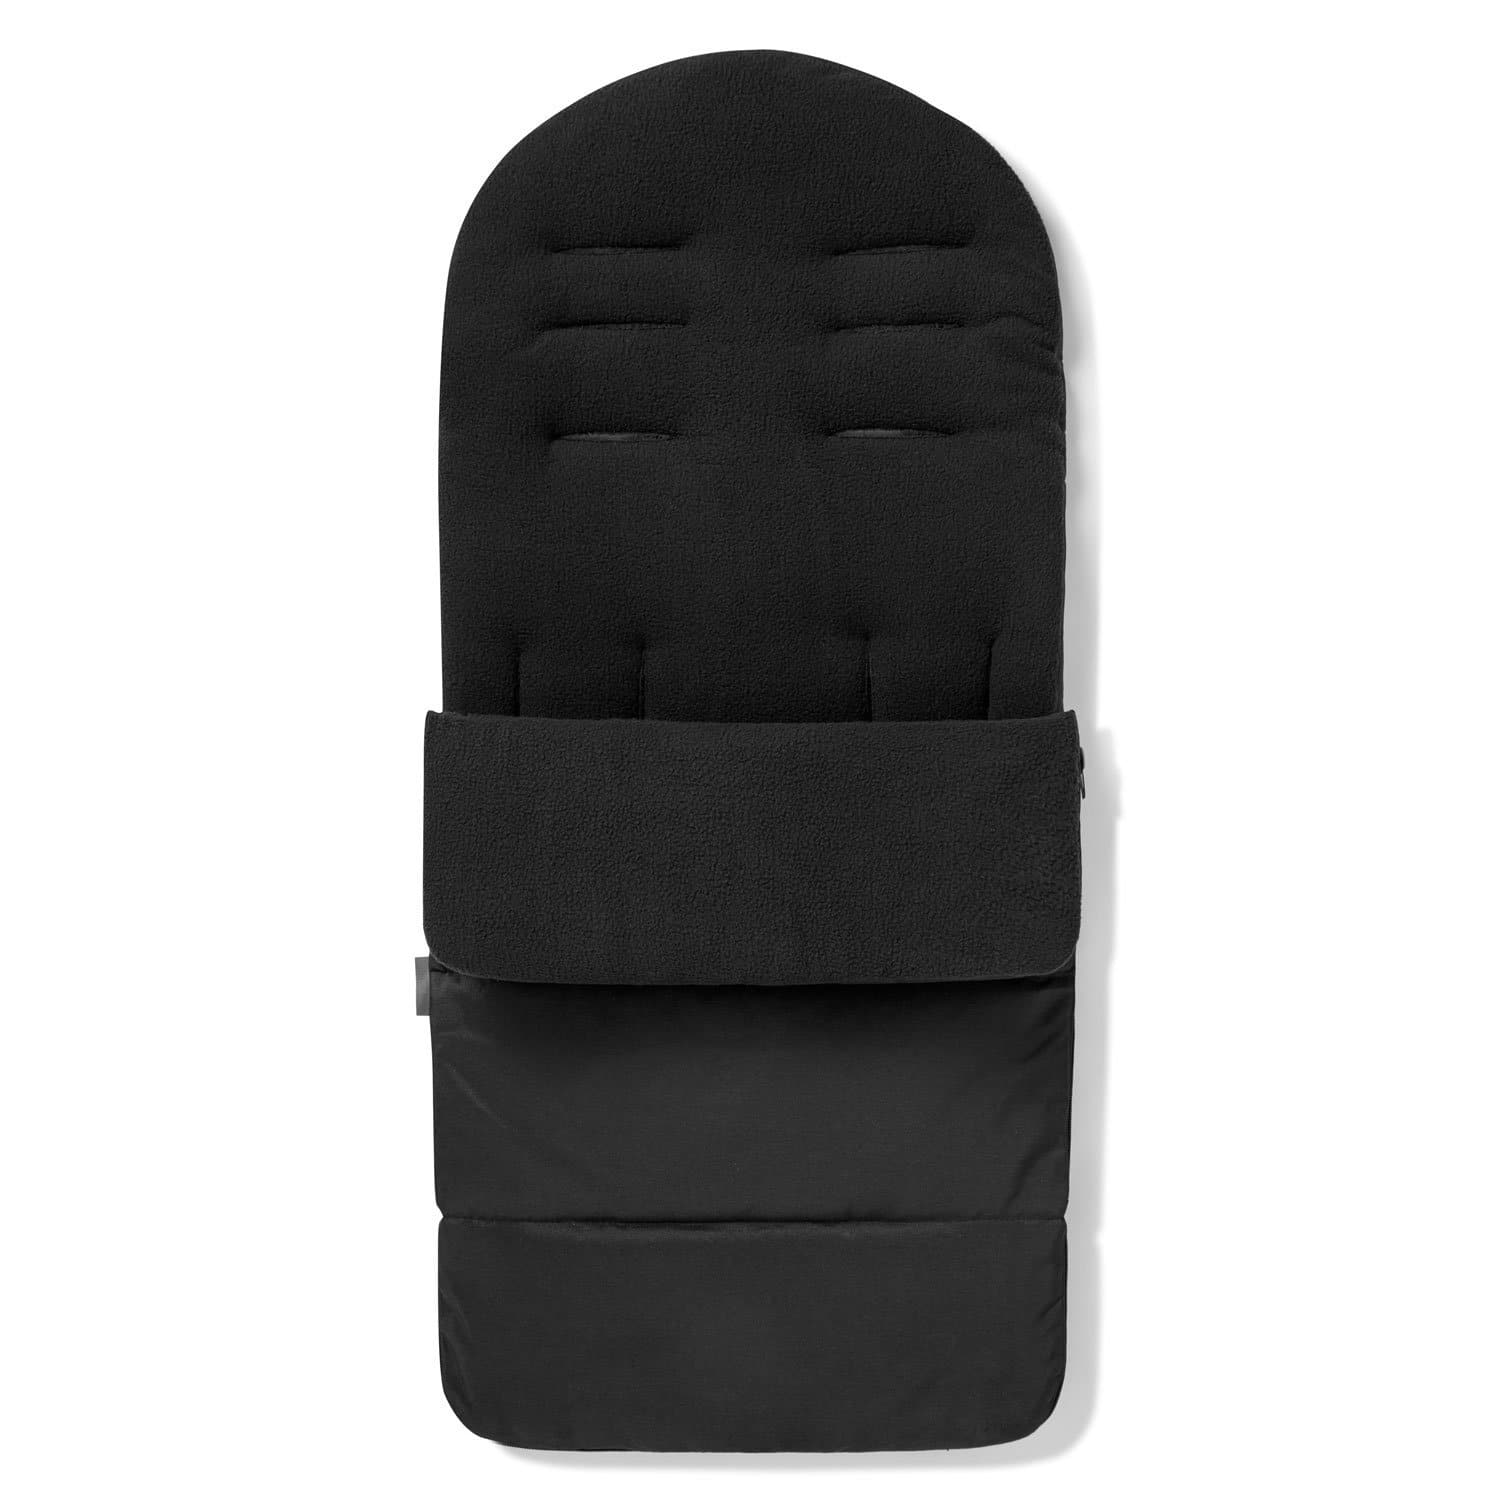 Premium Footmuff / Cosy Toes Compatible with Seed - Black Jack / Fits All Models | For Your Little One